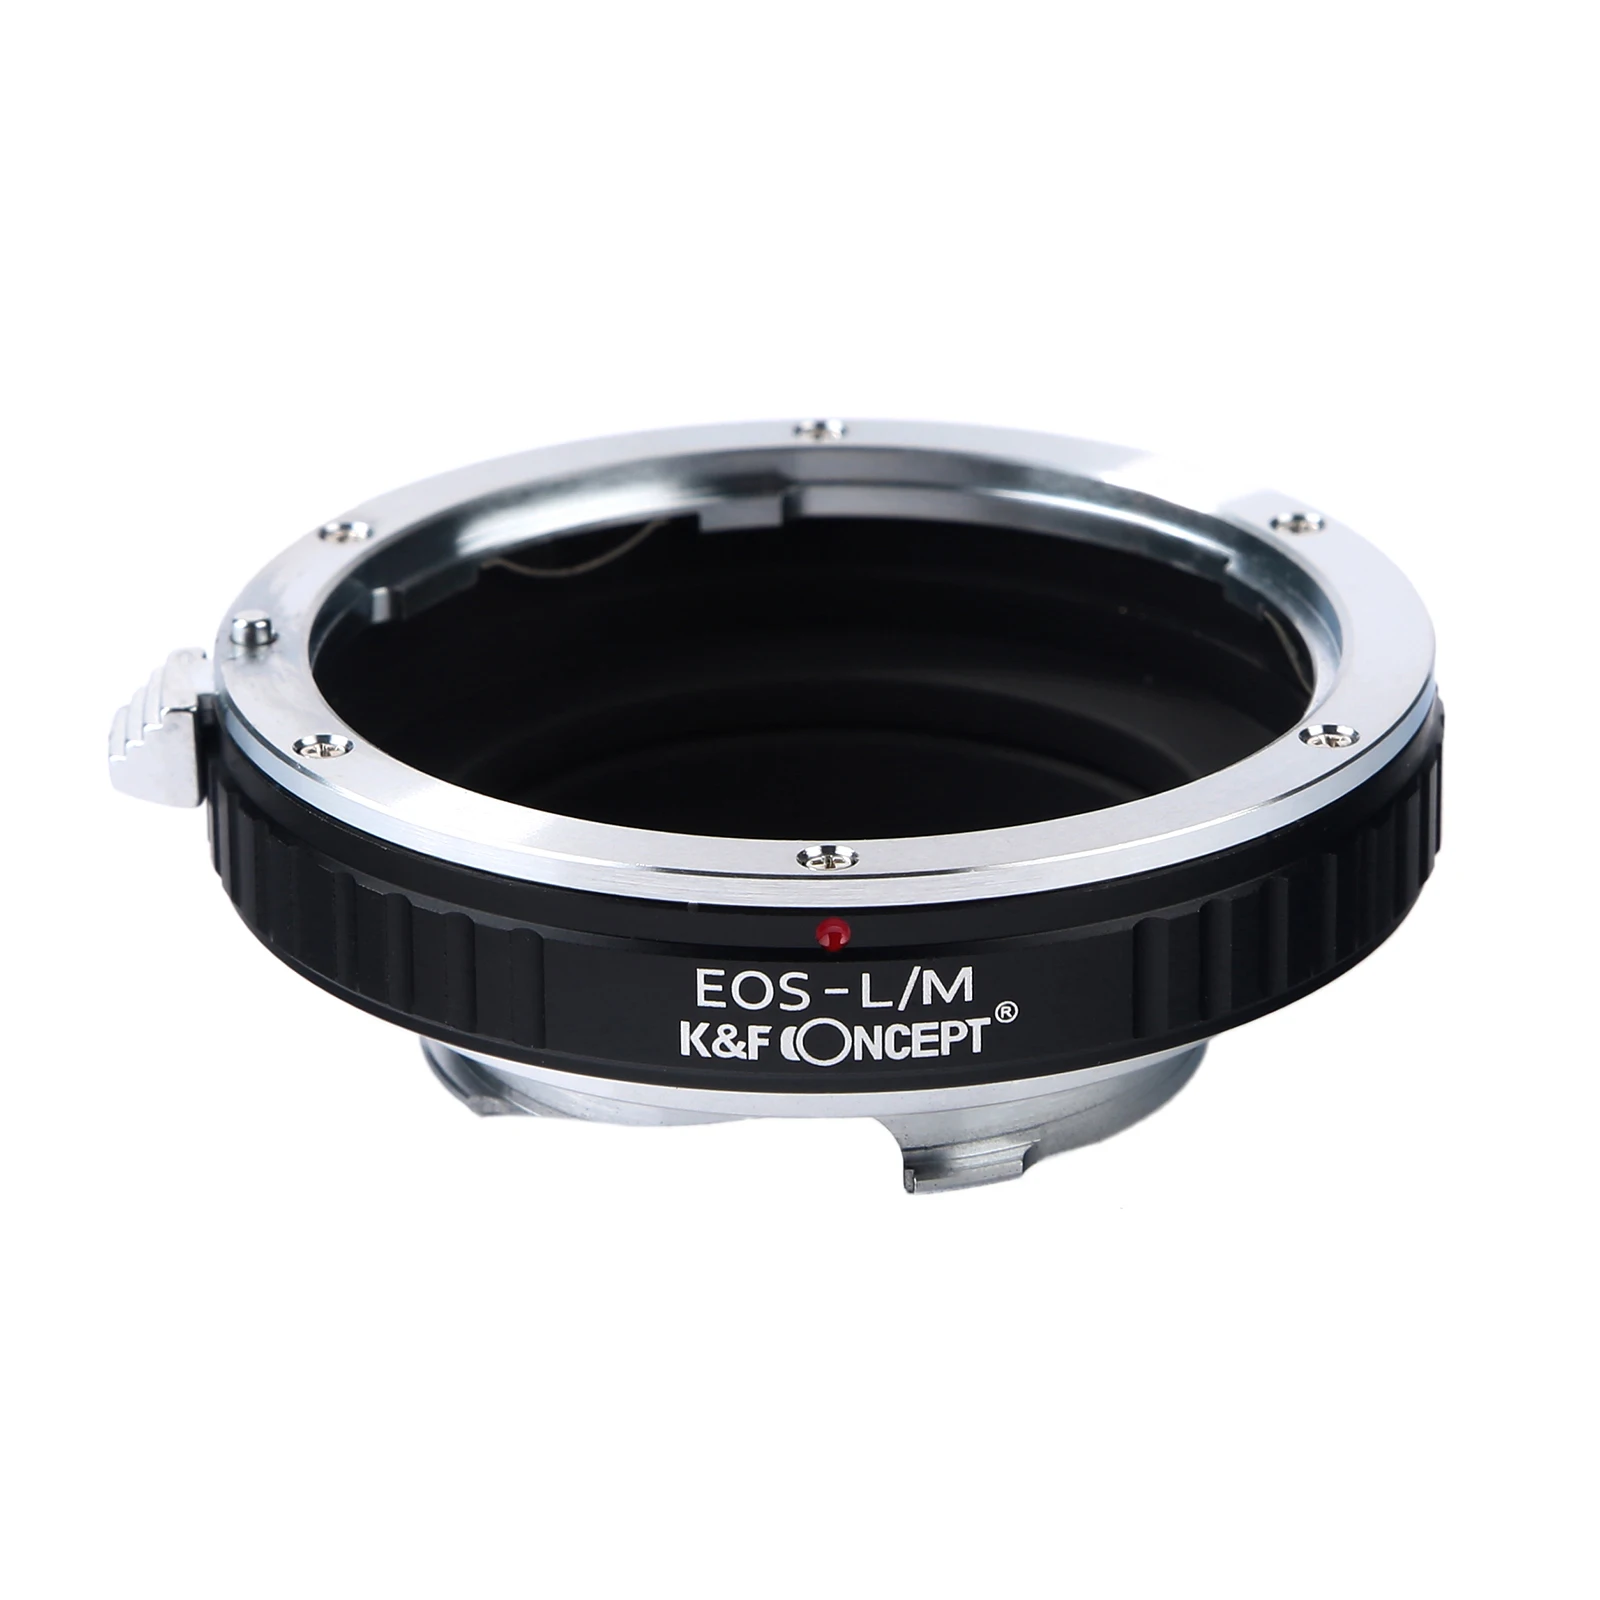 

K&F Concept Camera Lens Adapter Ring For Canon for EOS EF Mount Adapter To EMF AF Confirm Macro for Leica M LM L/M Lens